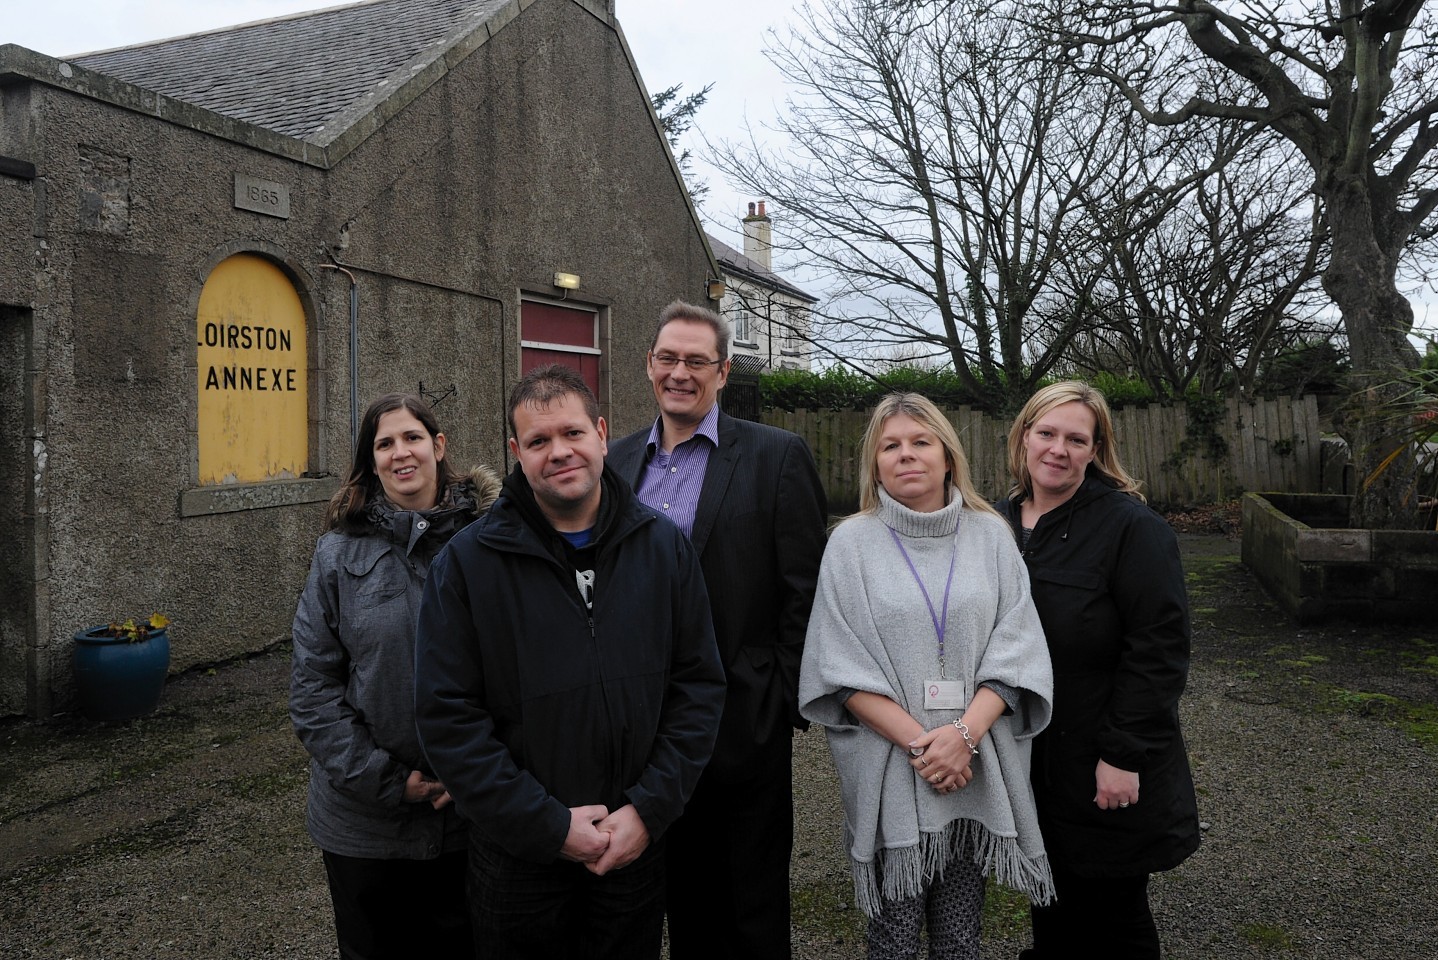 Fleur Tarling, Neil Strachan, John Low, Anne-Marie Steehouder and Claire Forbes at Loirston Annexe Community Centre.